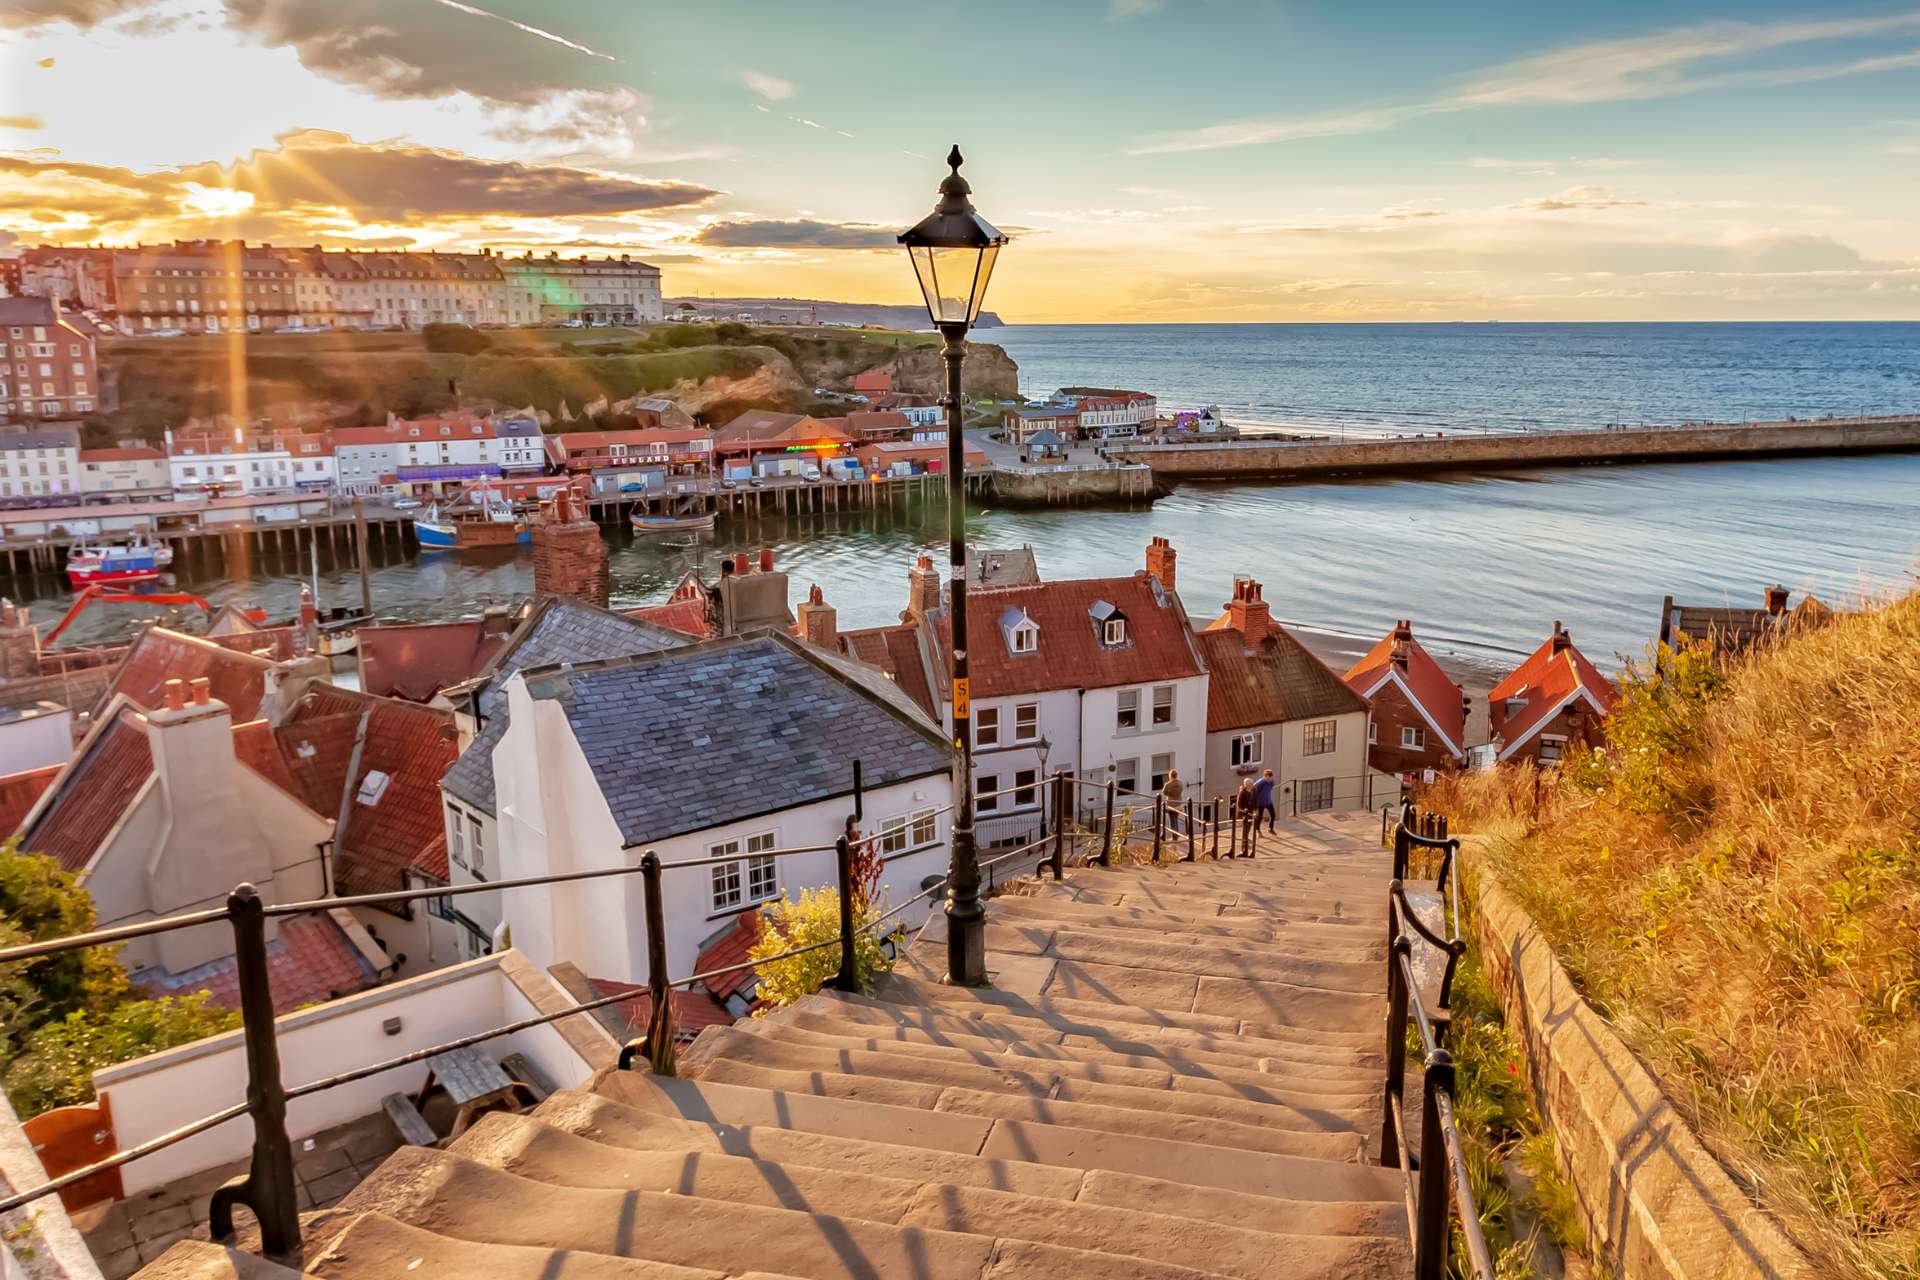 View of Whitby from 199 steps